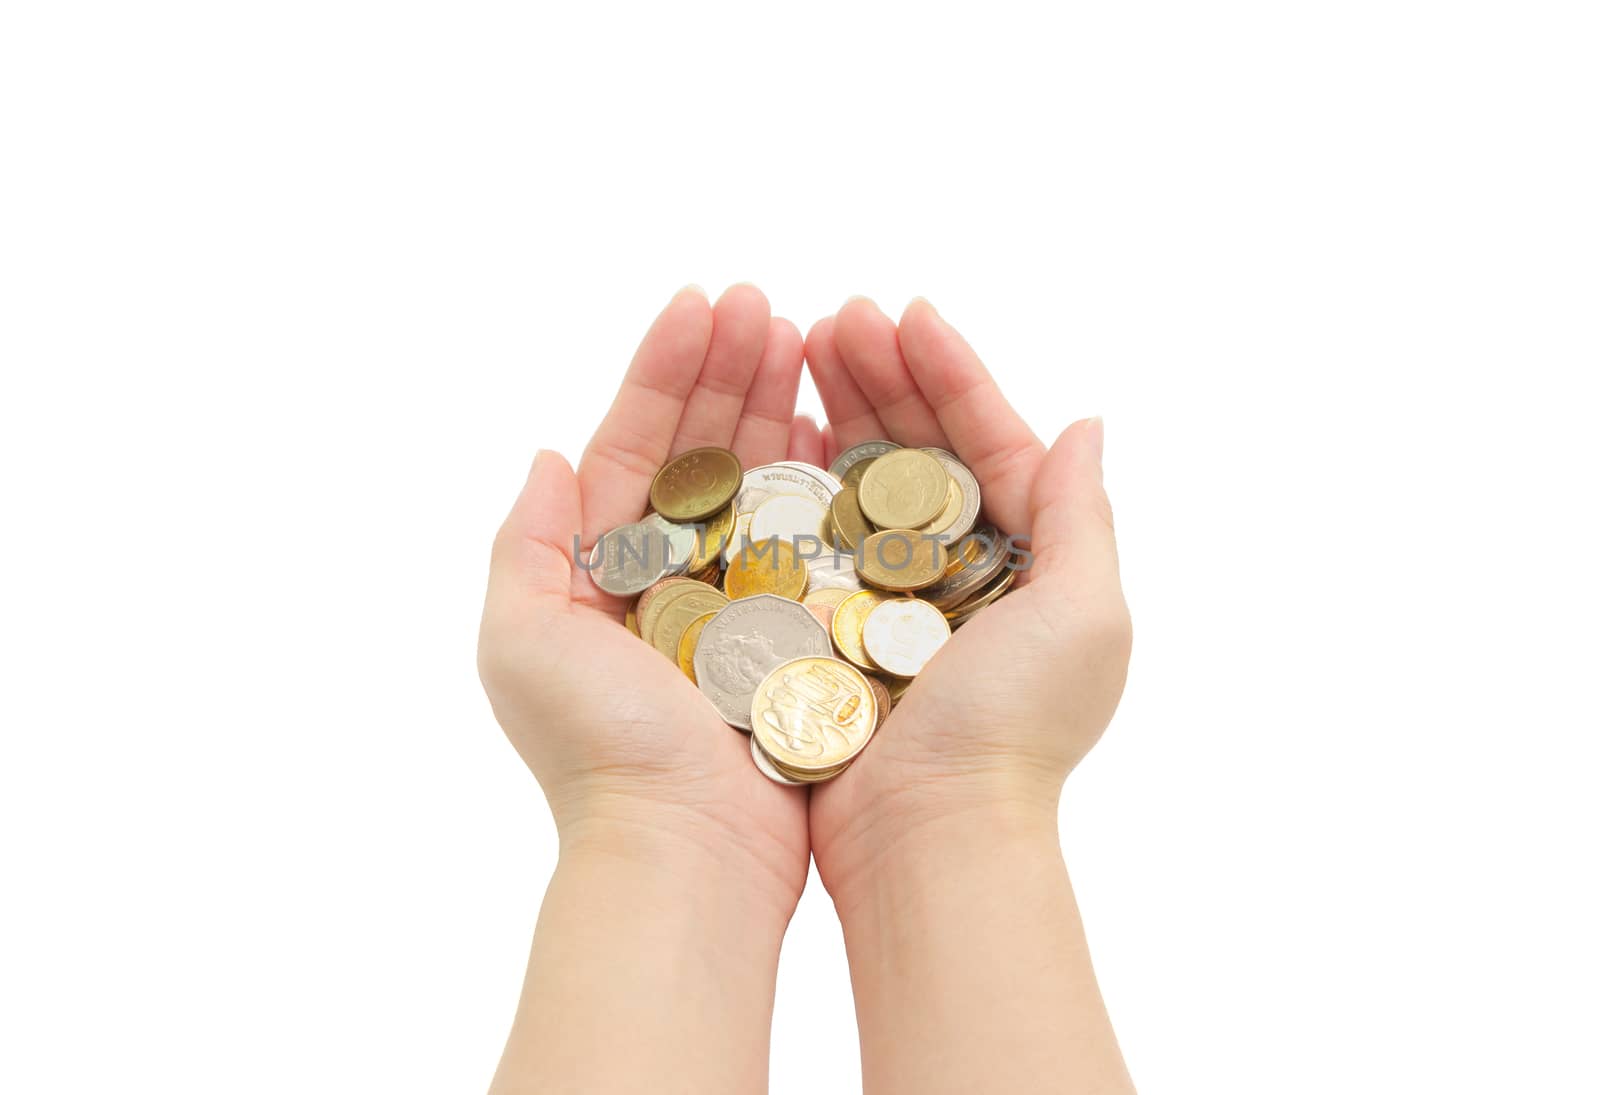 closeup woman's hands holding world coins isolated on white background, human hands and saving concepts